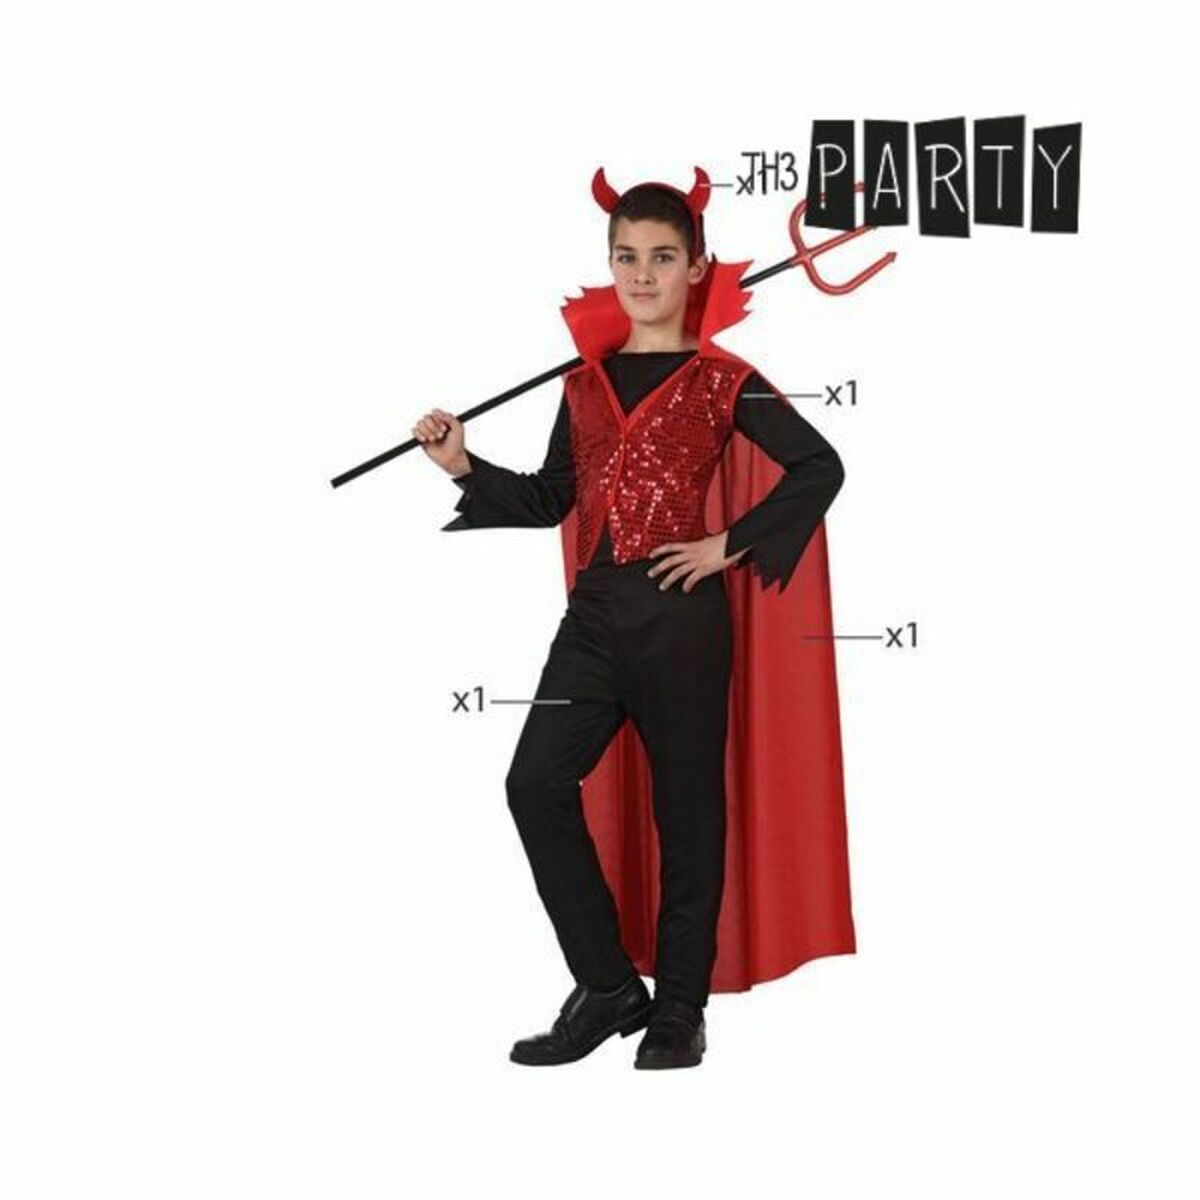 Costume for Children Th3 Party 5261 Multicolour Male Demon 3-4 Years